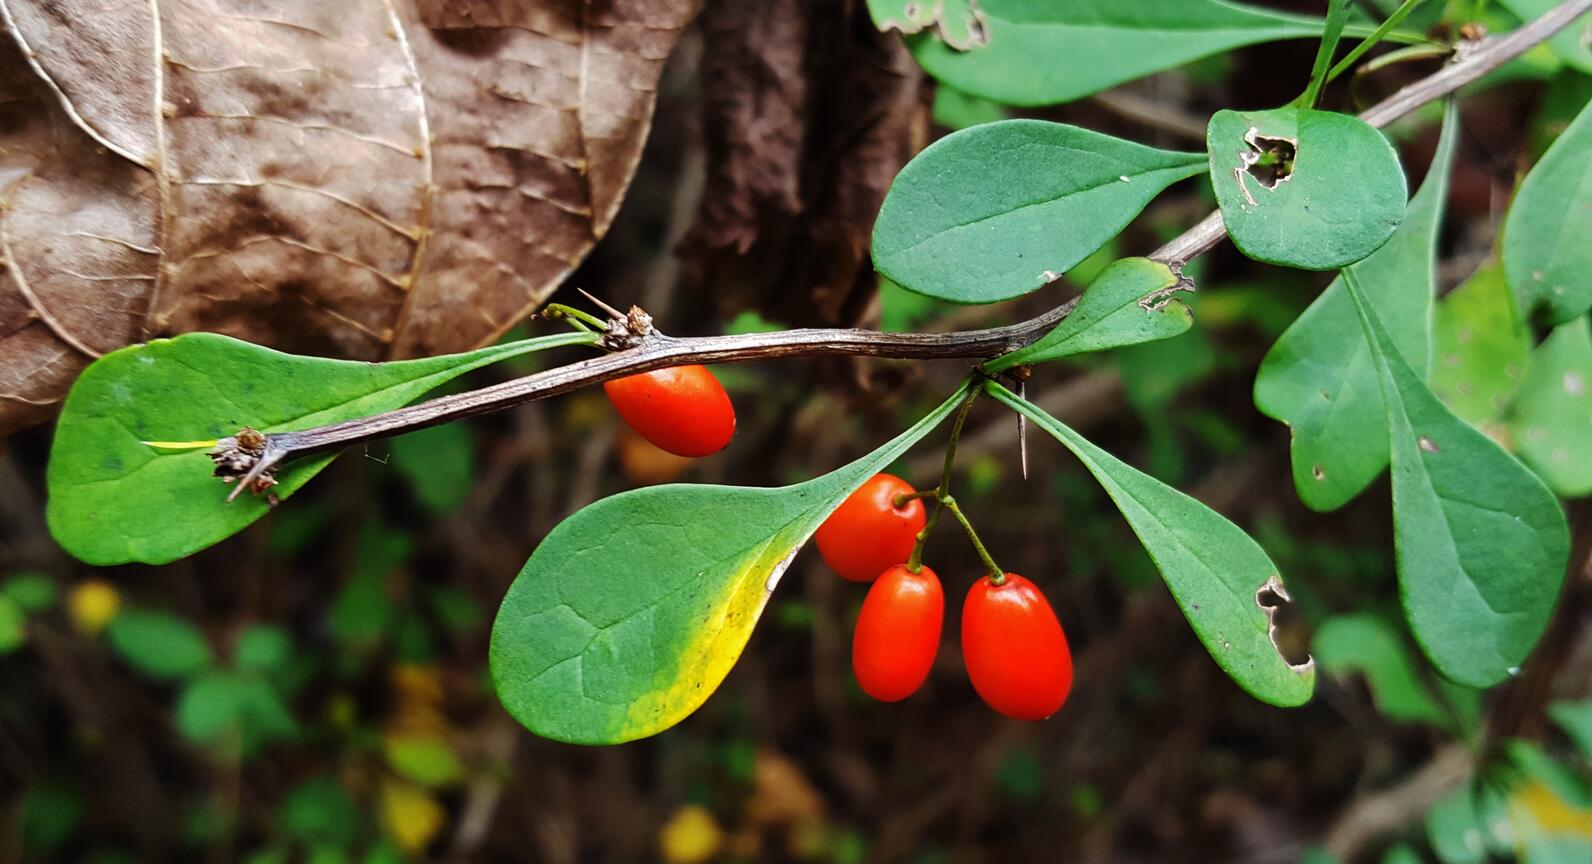 Japanese Barberry branch, red oval berries and tear shaped green leaves.